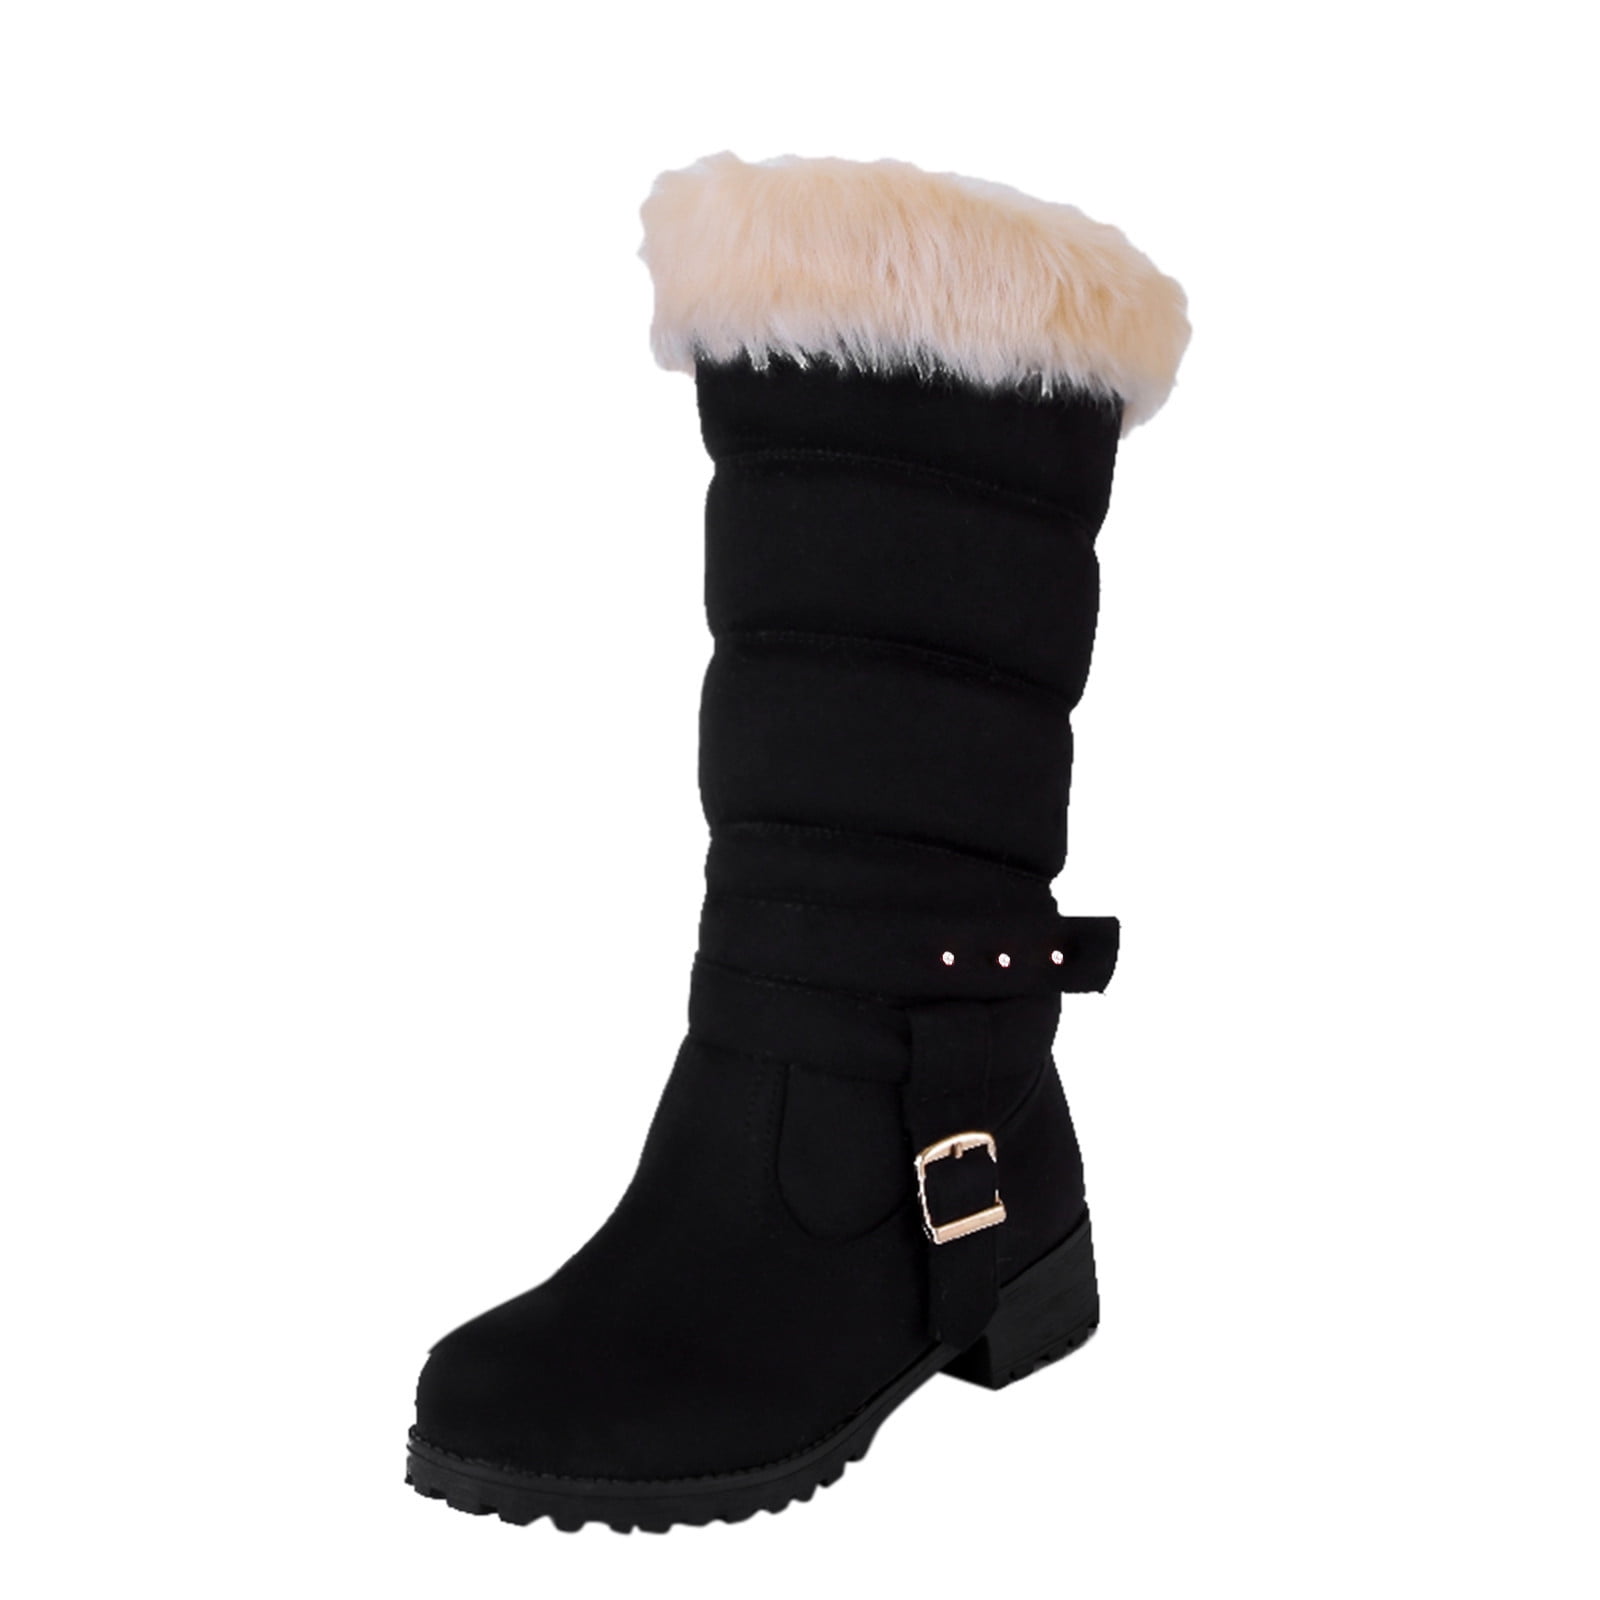 fvwitlyh Boots for Womens Snow Boots Size 10 Wide Width Boots Warm ...